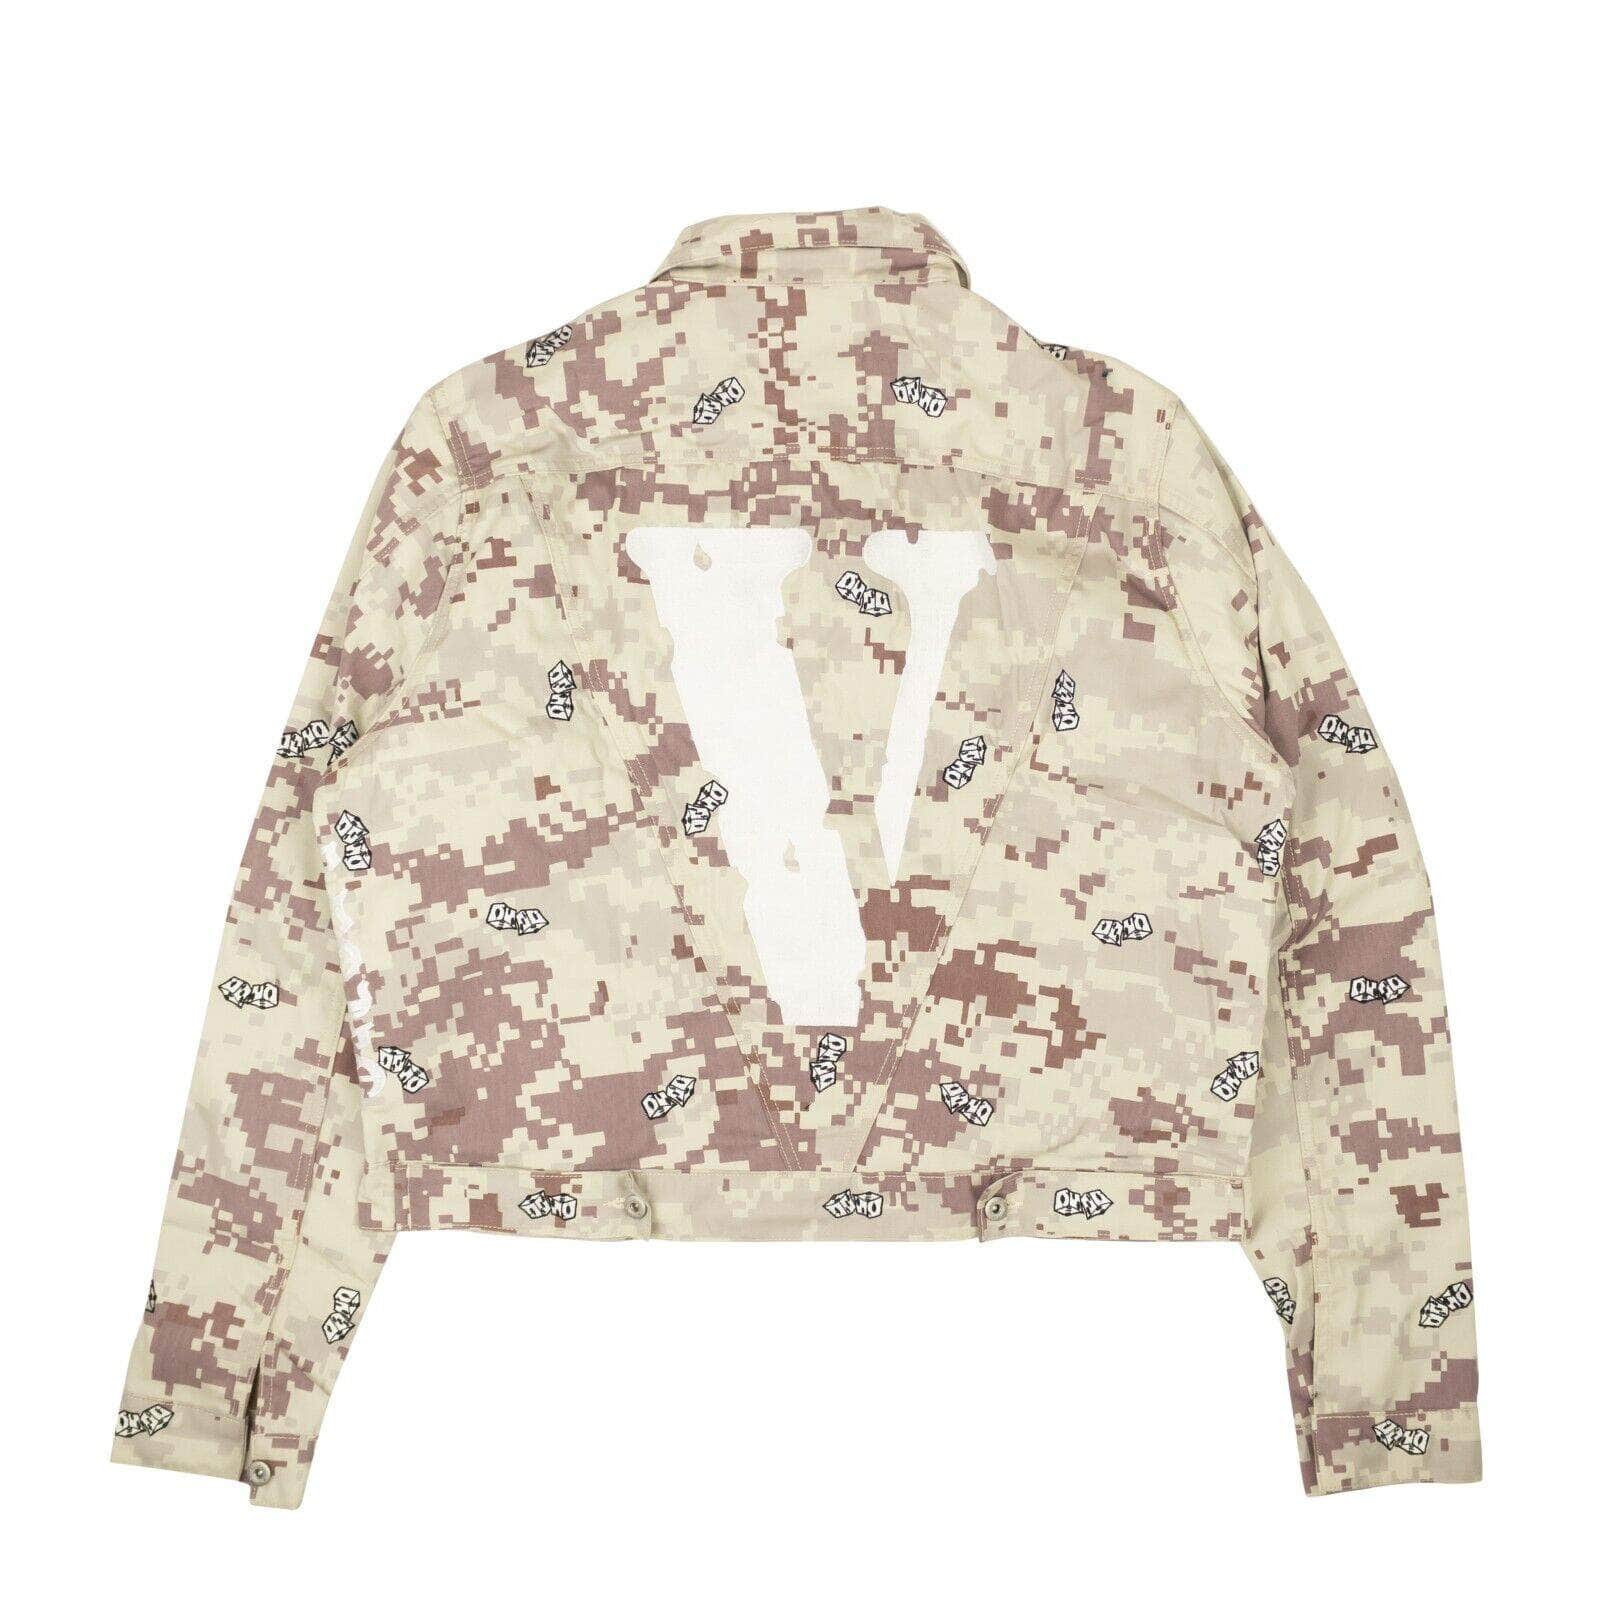 Vlone 750-1000, channelenable-all, chicmi, couponcollection, gender-mens, main-clothing, mens-denim-jackets, mens-shoes, size-xxl, vlone XXL Beige Digi Camo Denim Jacket VLN-XOTW-0002/XXL VLN-XOTW-0002/XXL